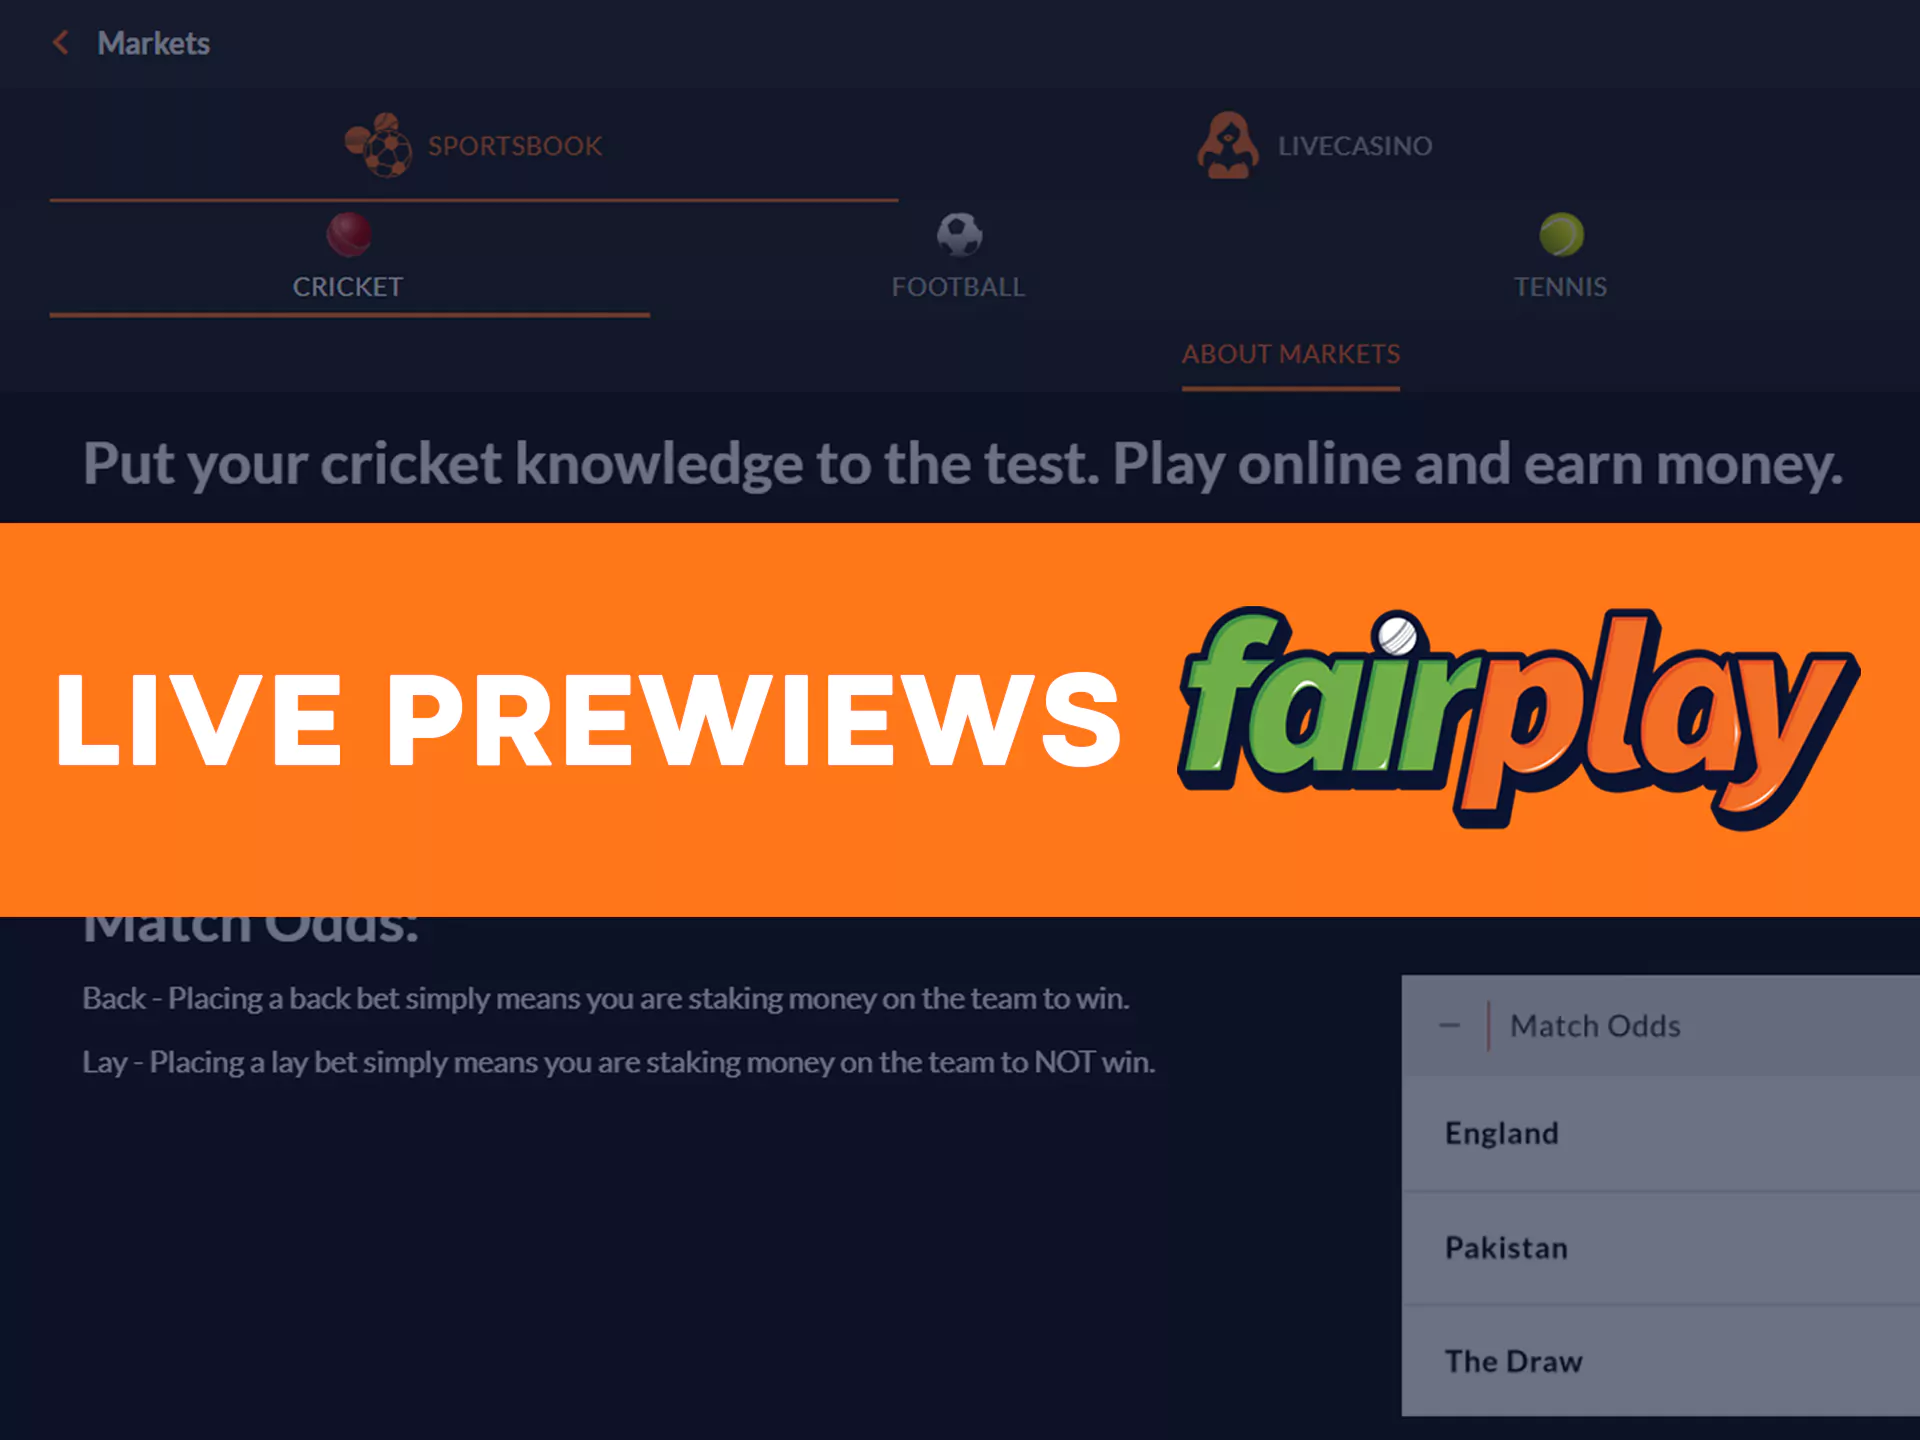 Know about game without checking at Fairplay website.